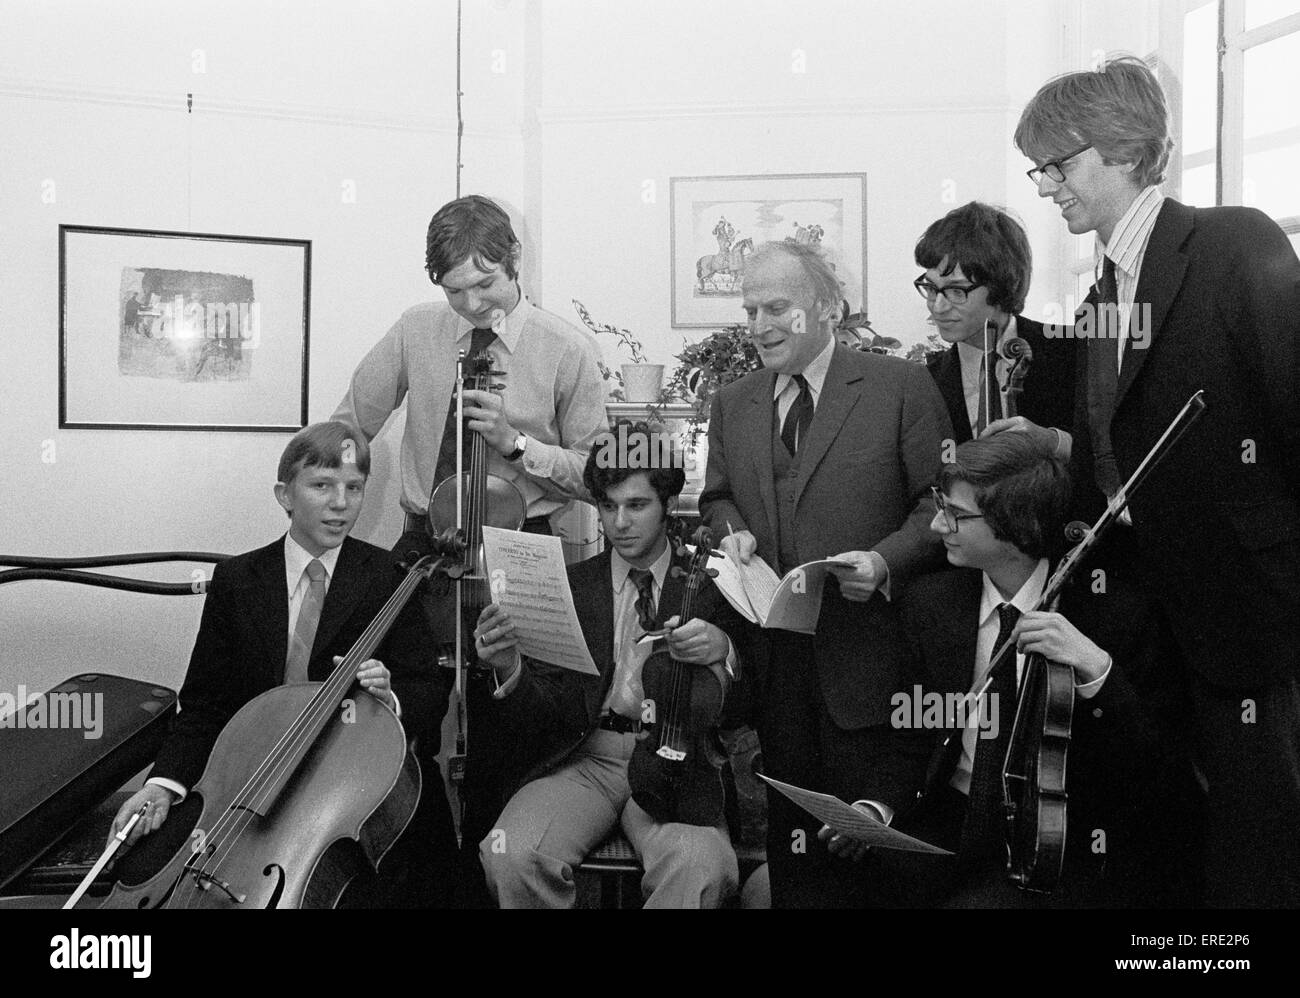 American-born violinist and conductor Yehudi Menuhin (1916-1999) pictured with members of the William Ellis School Orchestra in Stock Photo